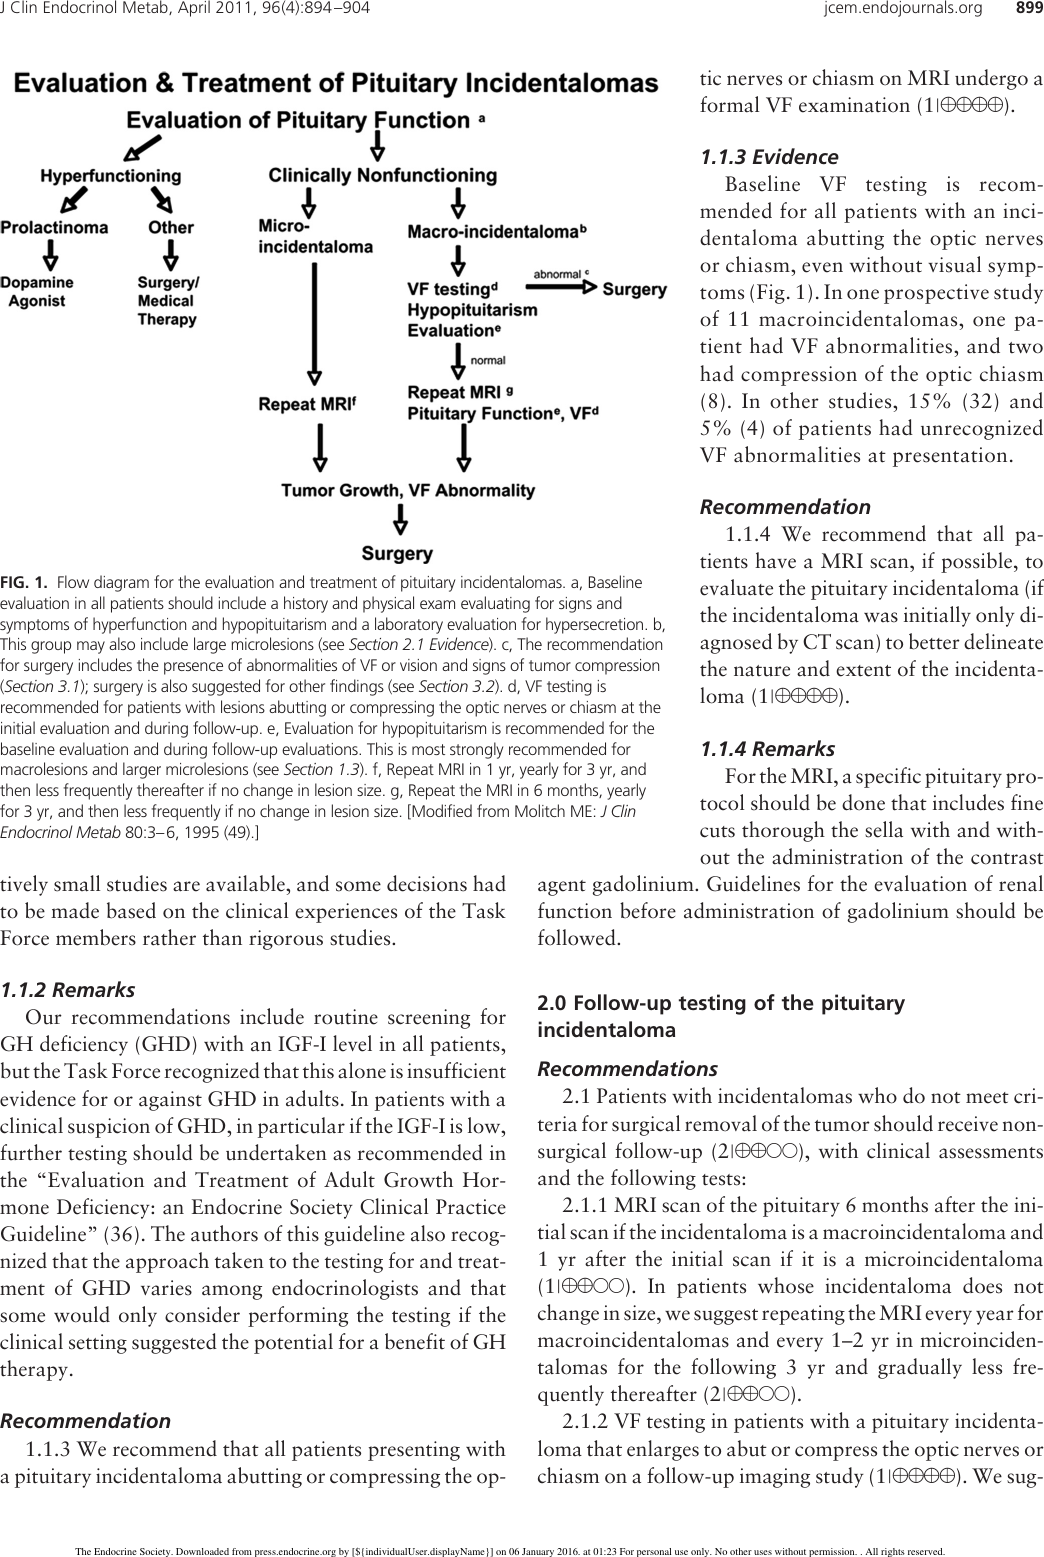 Page 6 of 11 - Pituitary Incidentaloma: An Endocrine Society Clinical Practice Guideline Incidentaloma Guide 2011